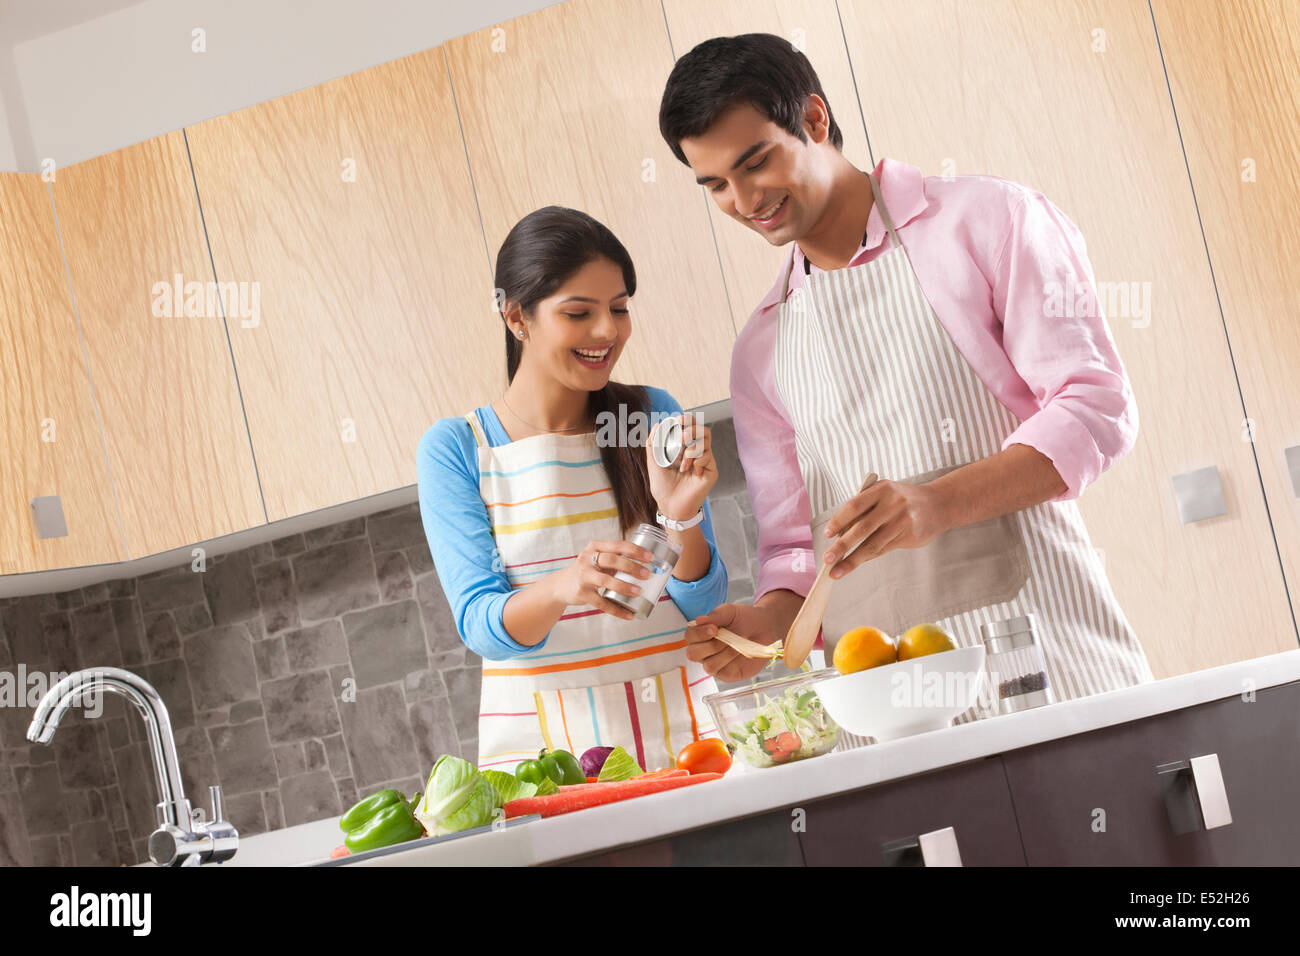 Smiling young couple preparing fresh salad in kitchen Stock Photo